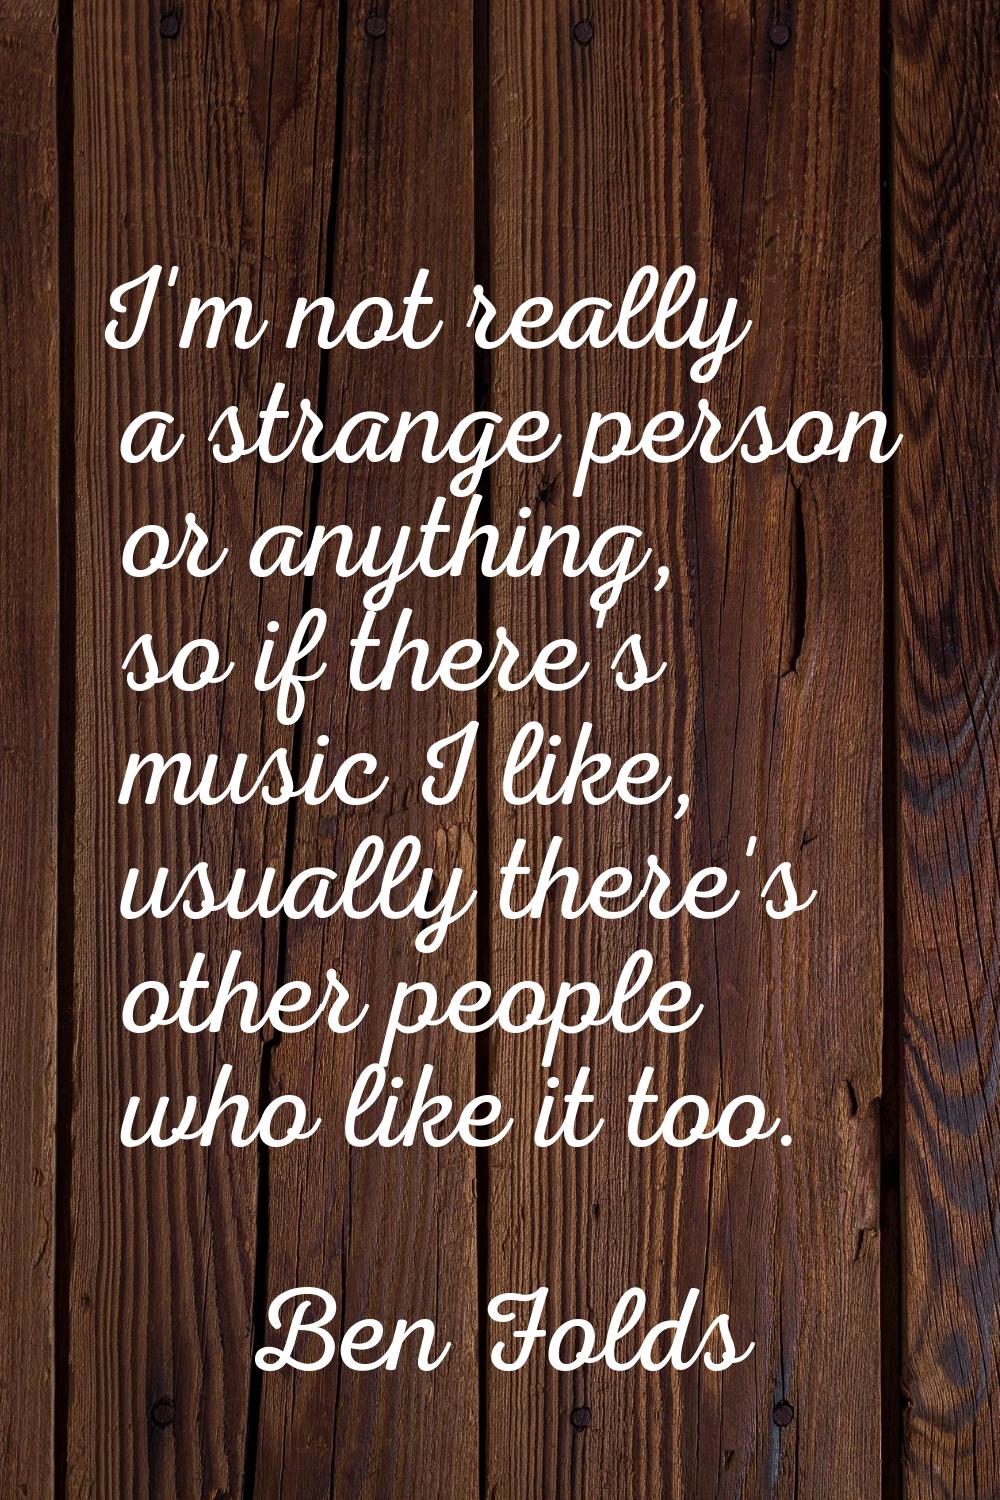 I'm not really a strange person or anything, so if there's music I like, usually there's other peop